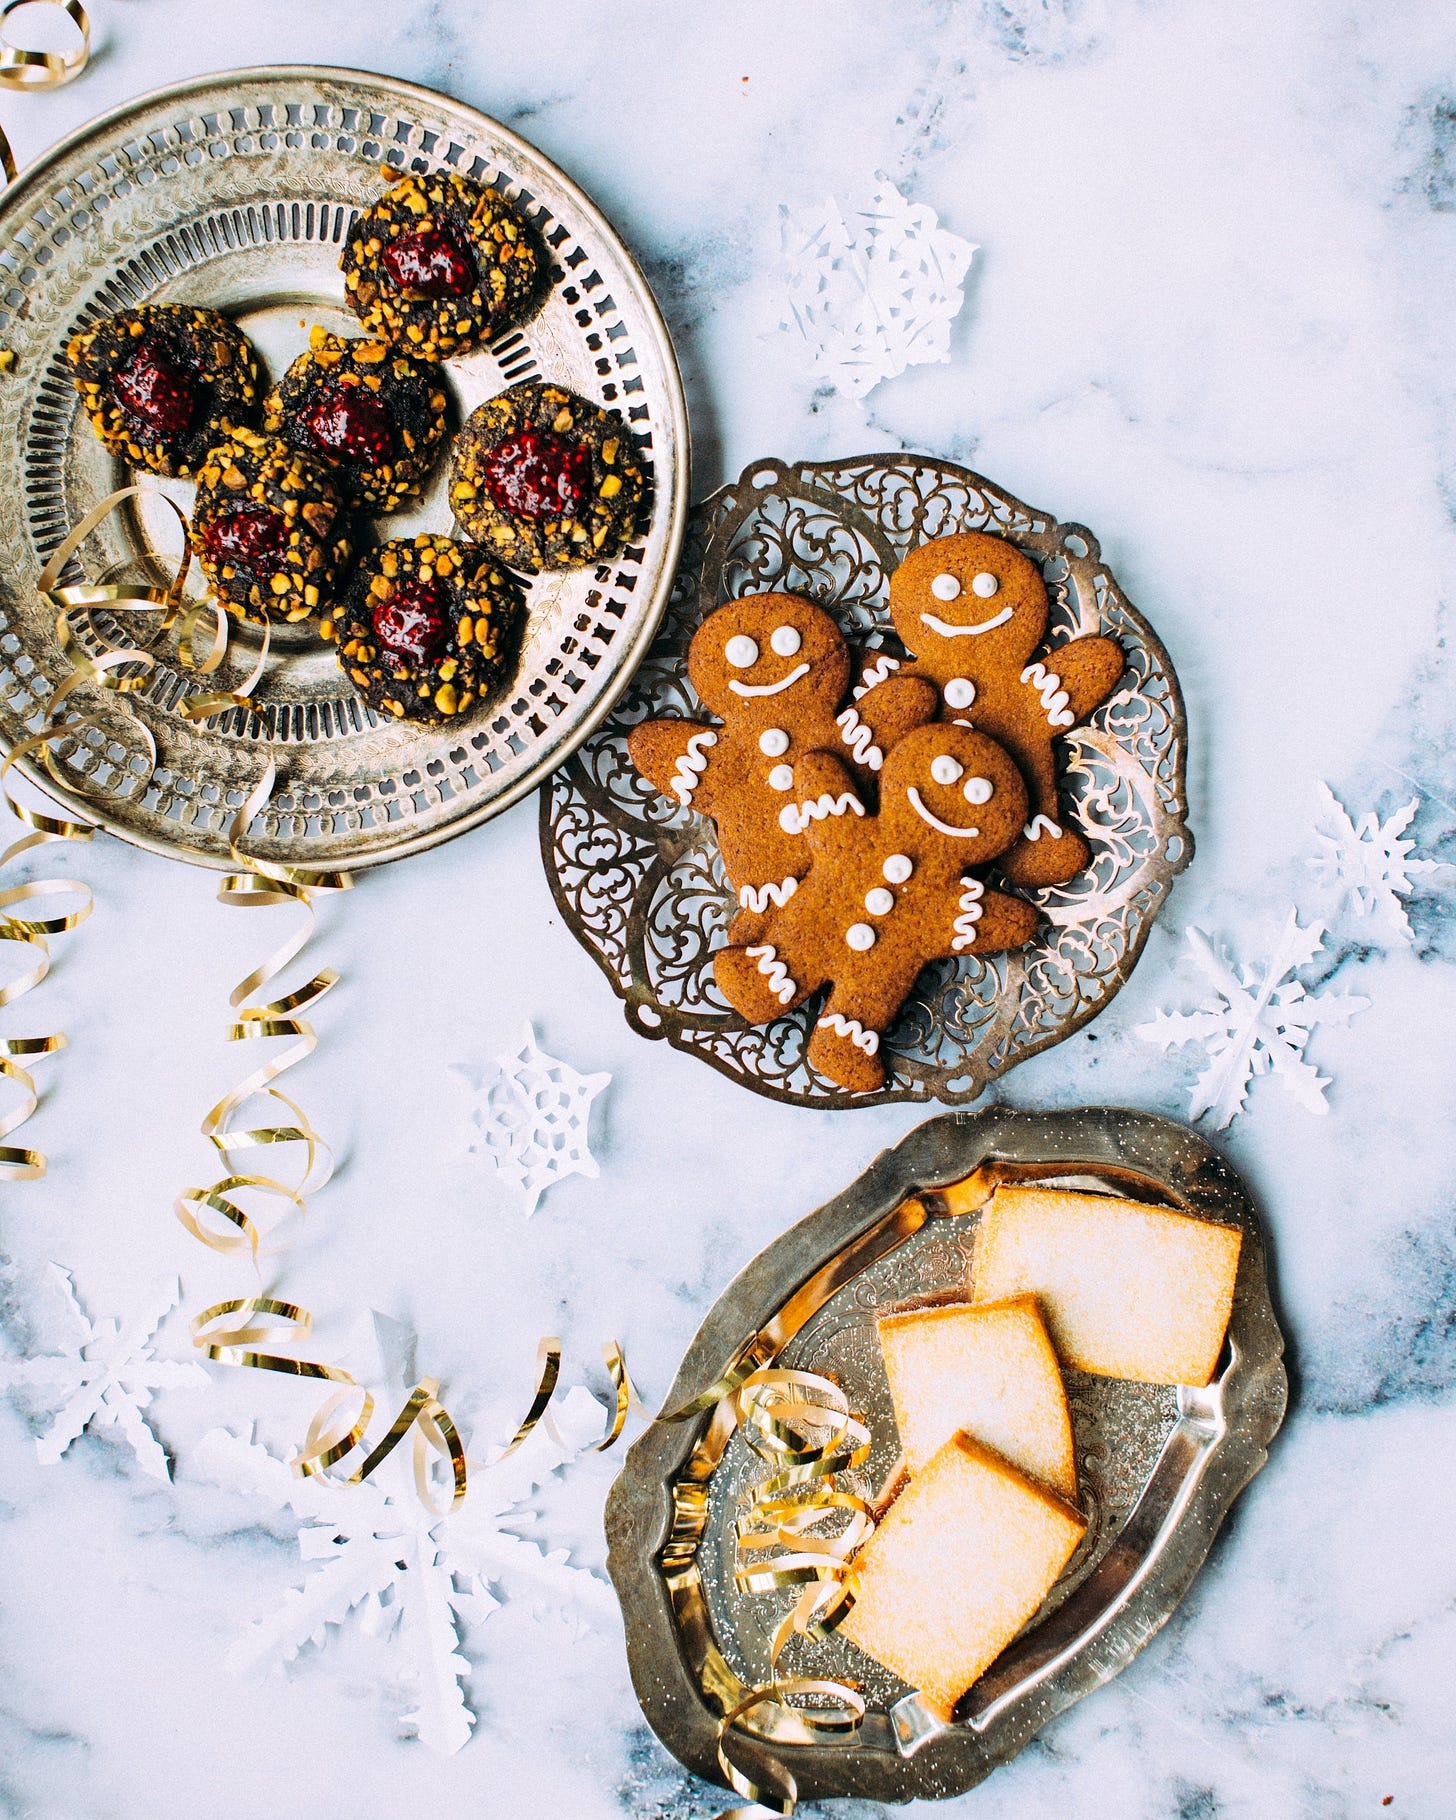 The Best Cookie Recipes for Your Holiday Cookie Exchange